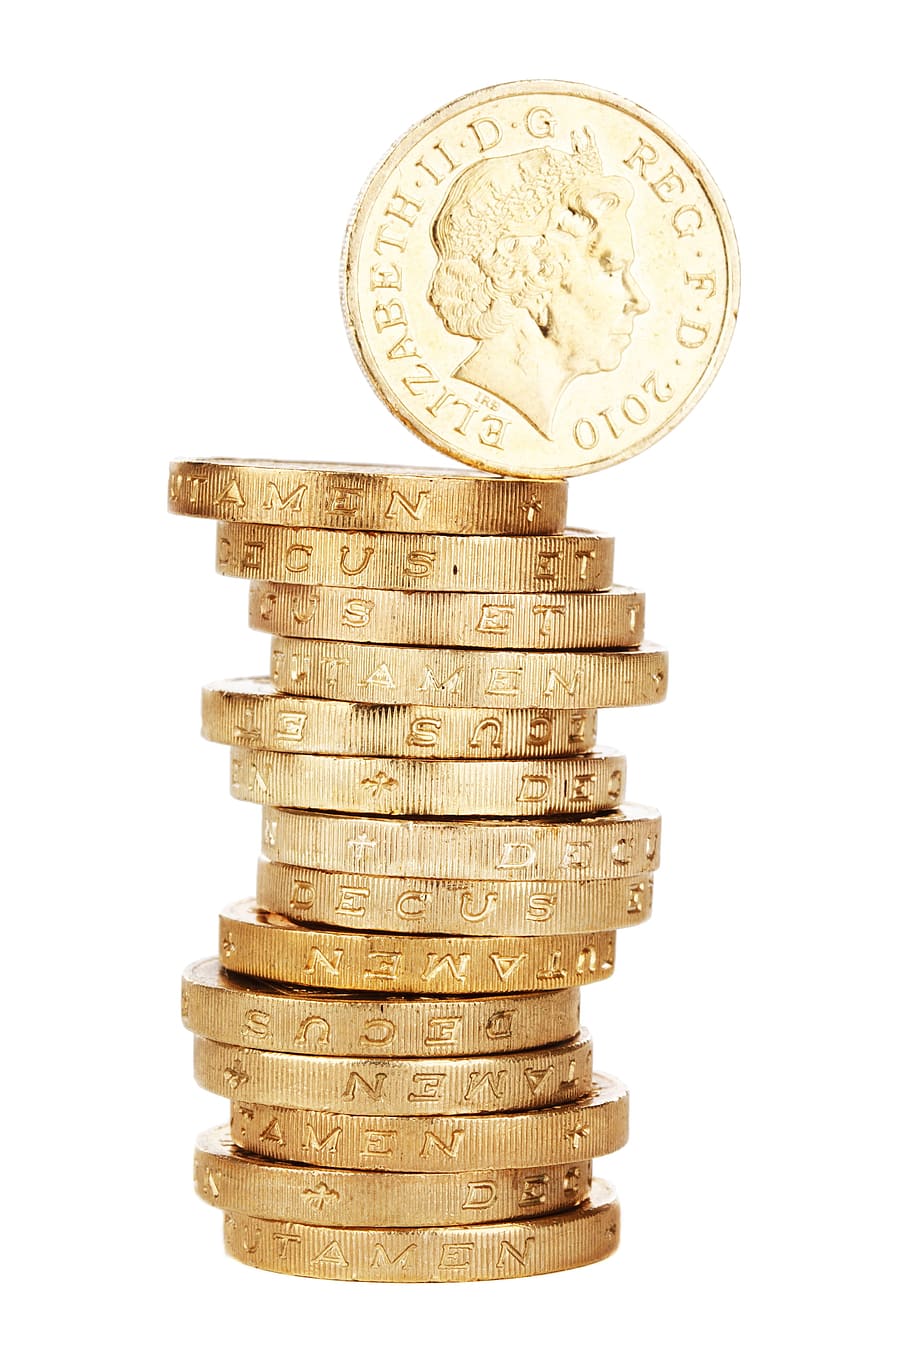 british, pound, coin, object, money, currency, business, finance, studio shot, white background